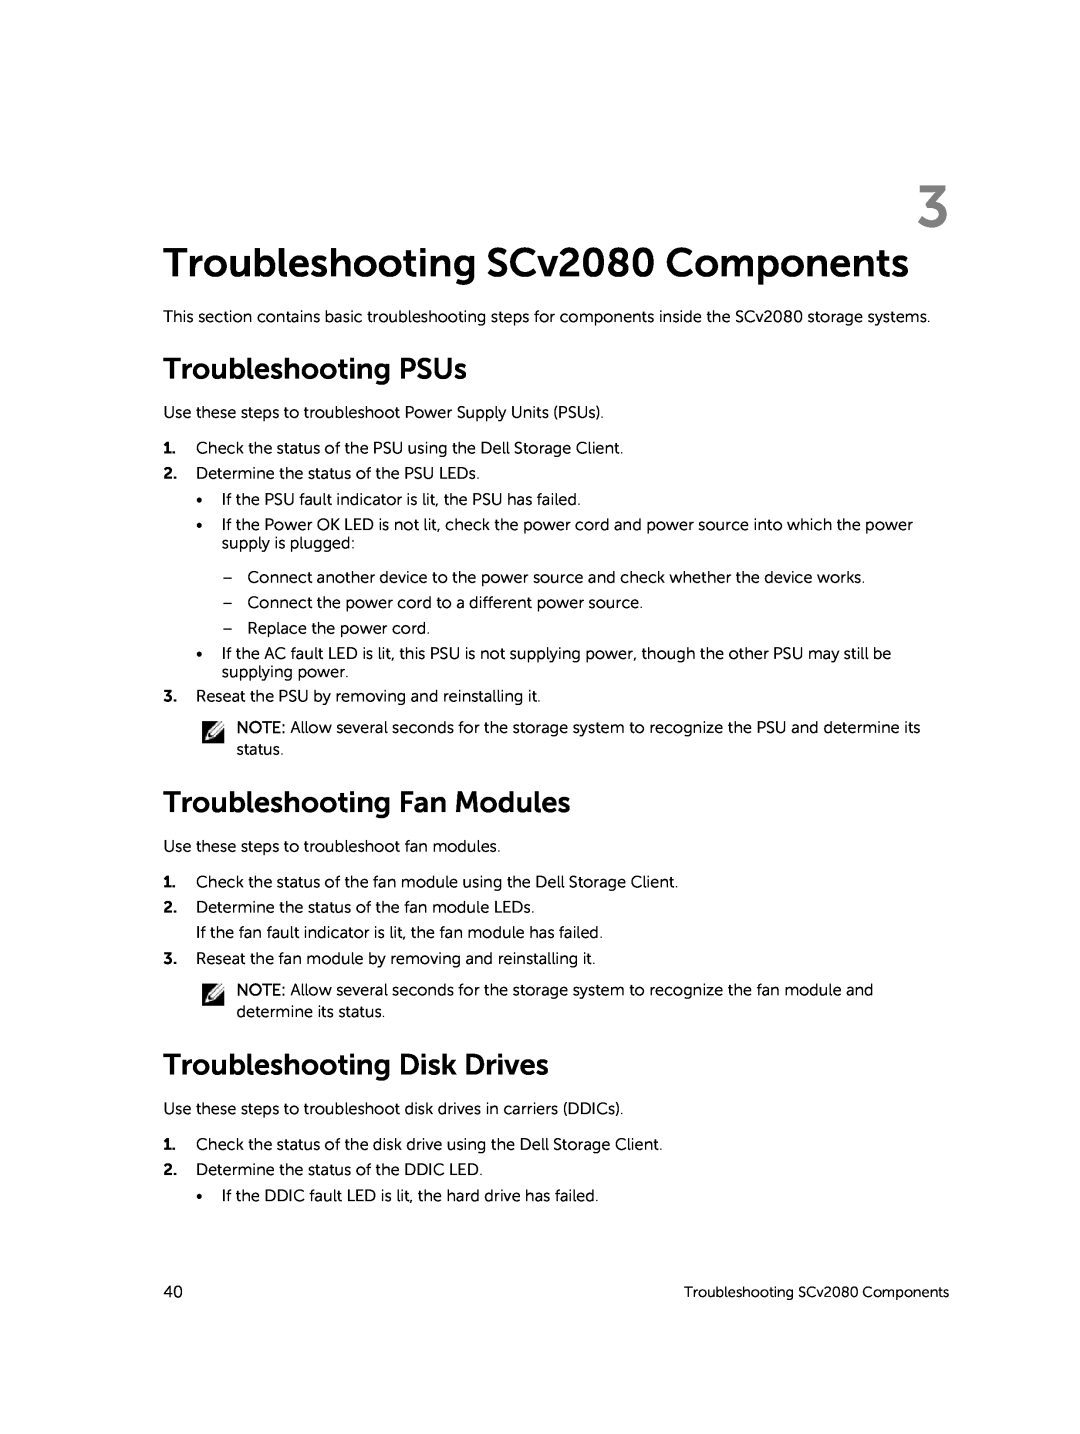 Dell E11J001 owner manual Troubleshooting SCv2080 Components, Troubleshooting PSUs, Troubleshooting Fan Modules 